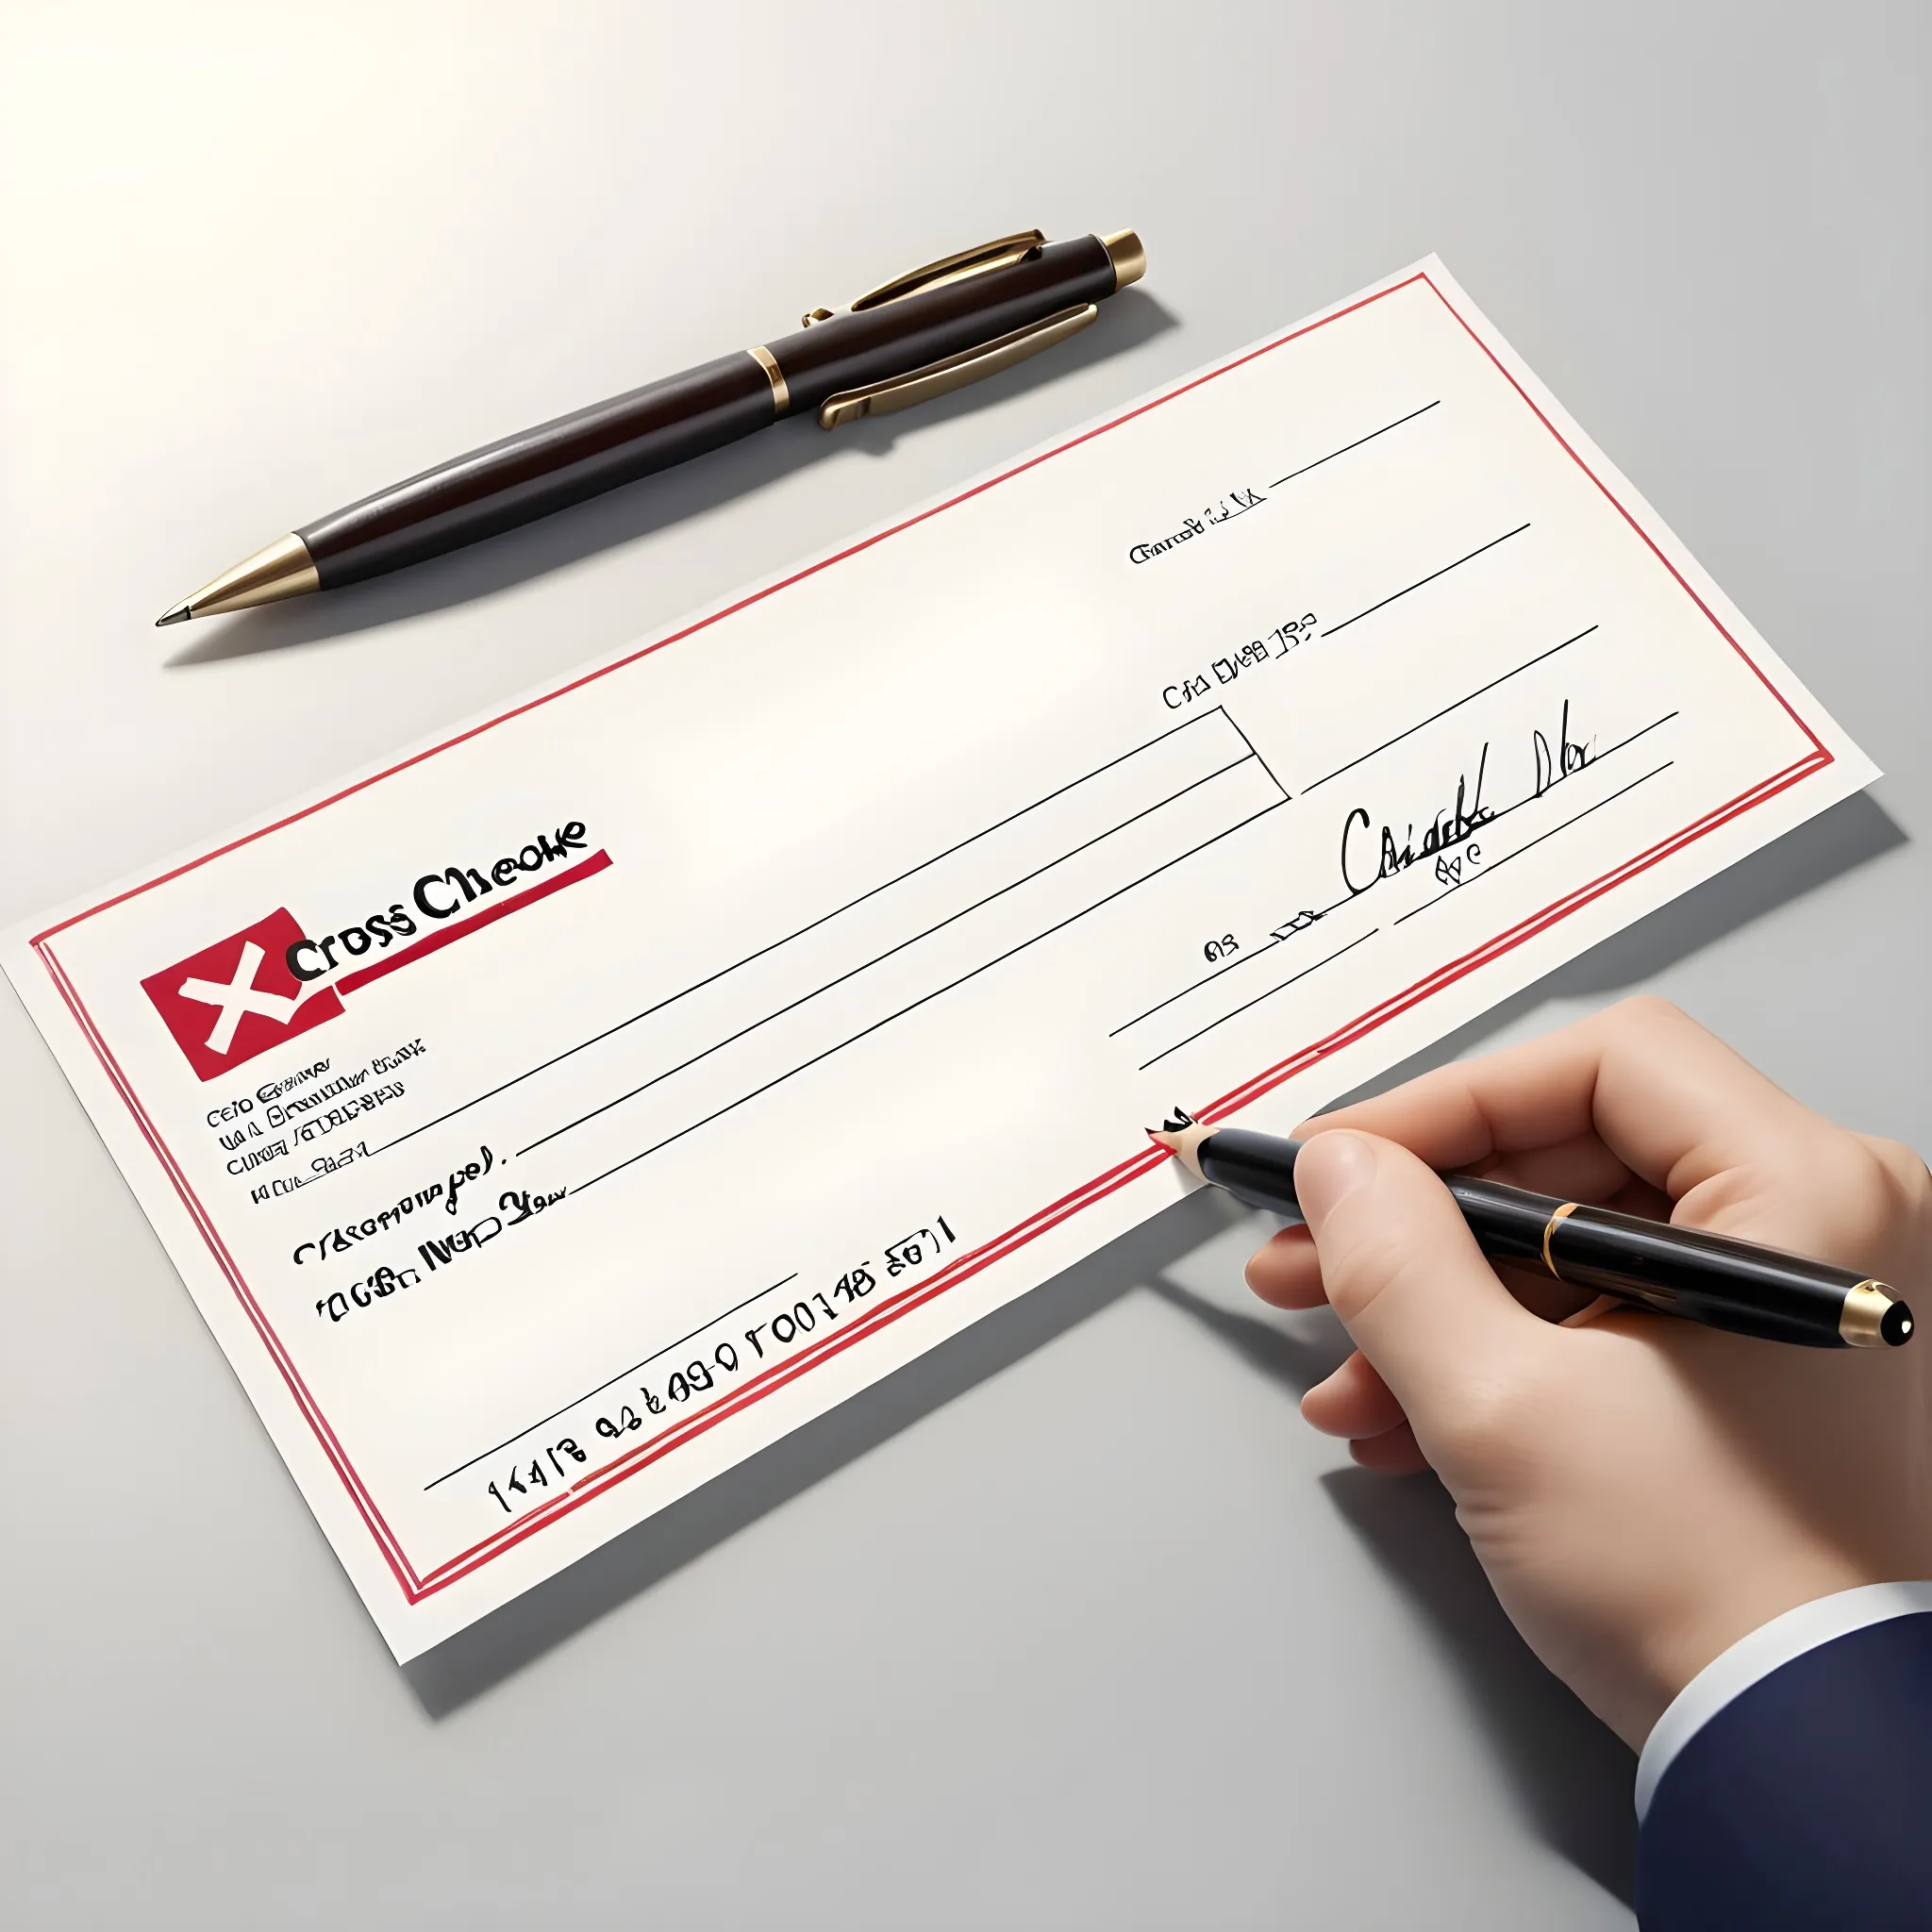 A Guide to Cross Cheques and It’s Types